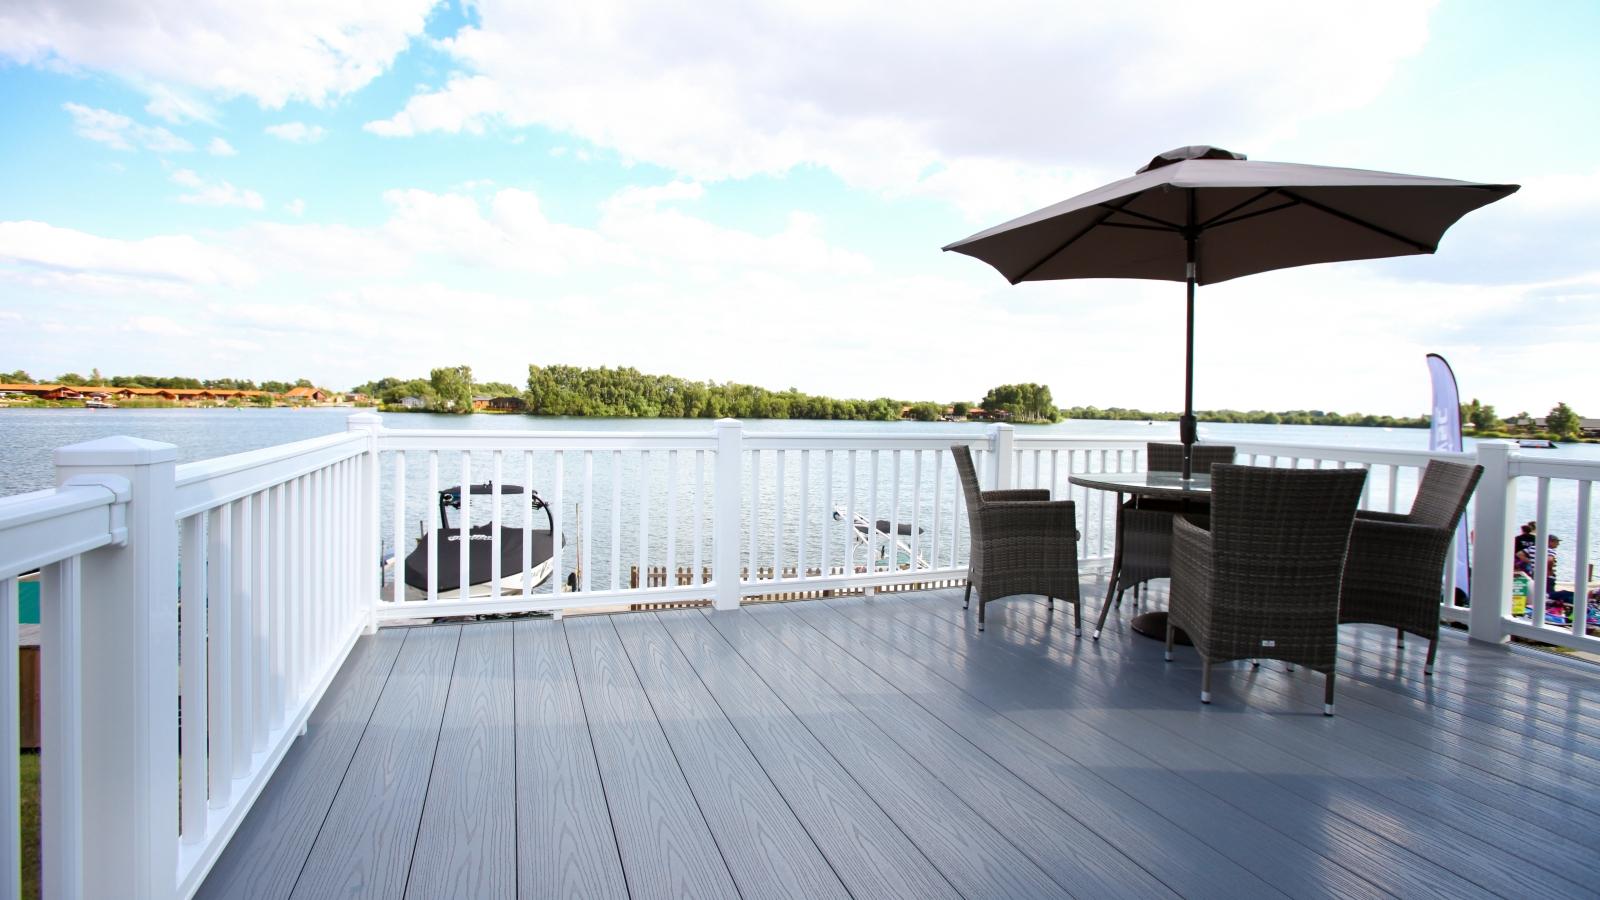 Grey Liniar decking with white balustrade fencing, table and chairs with parasol